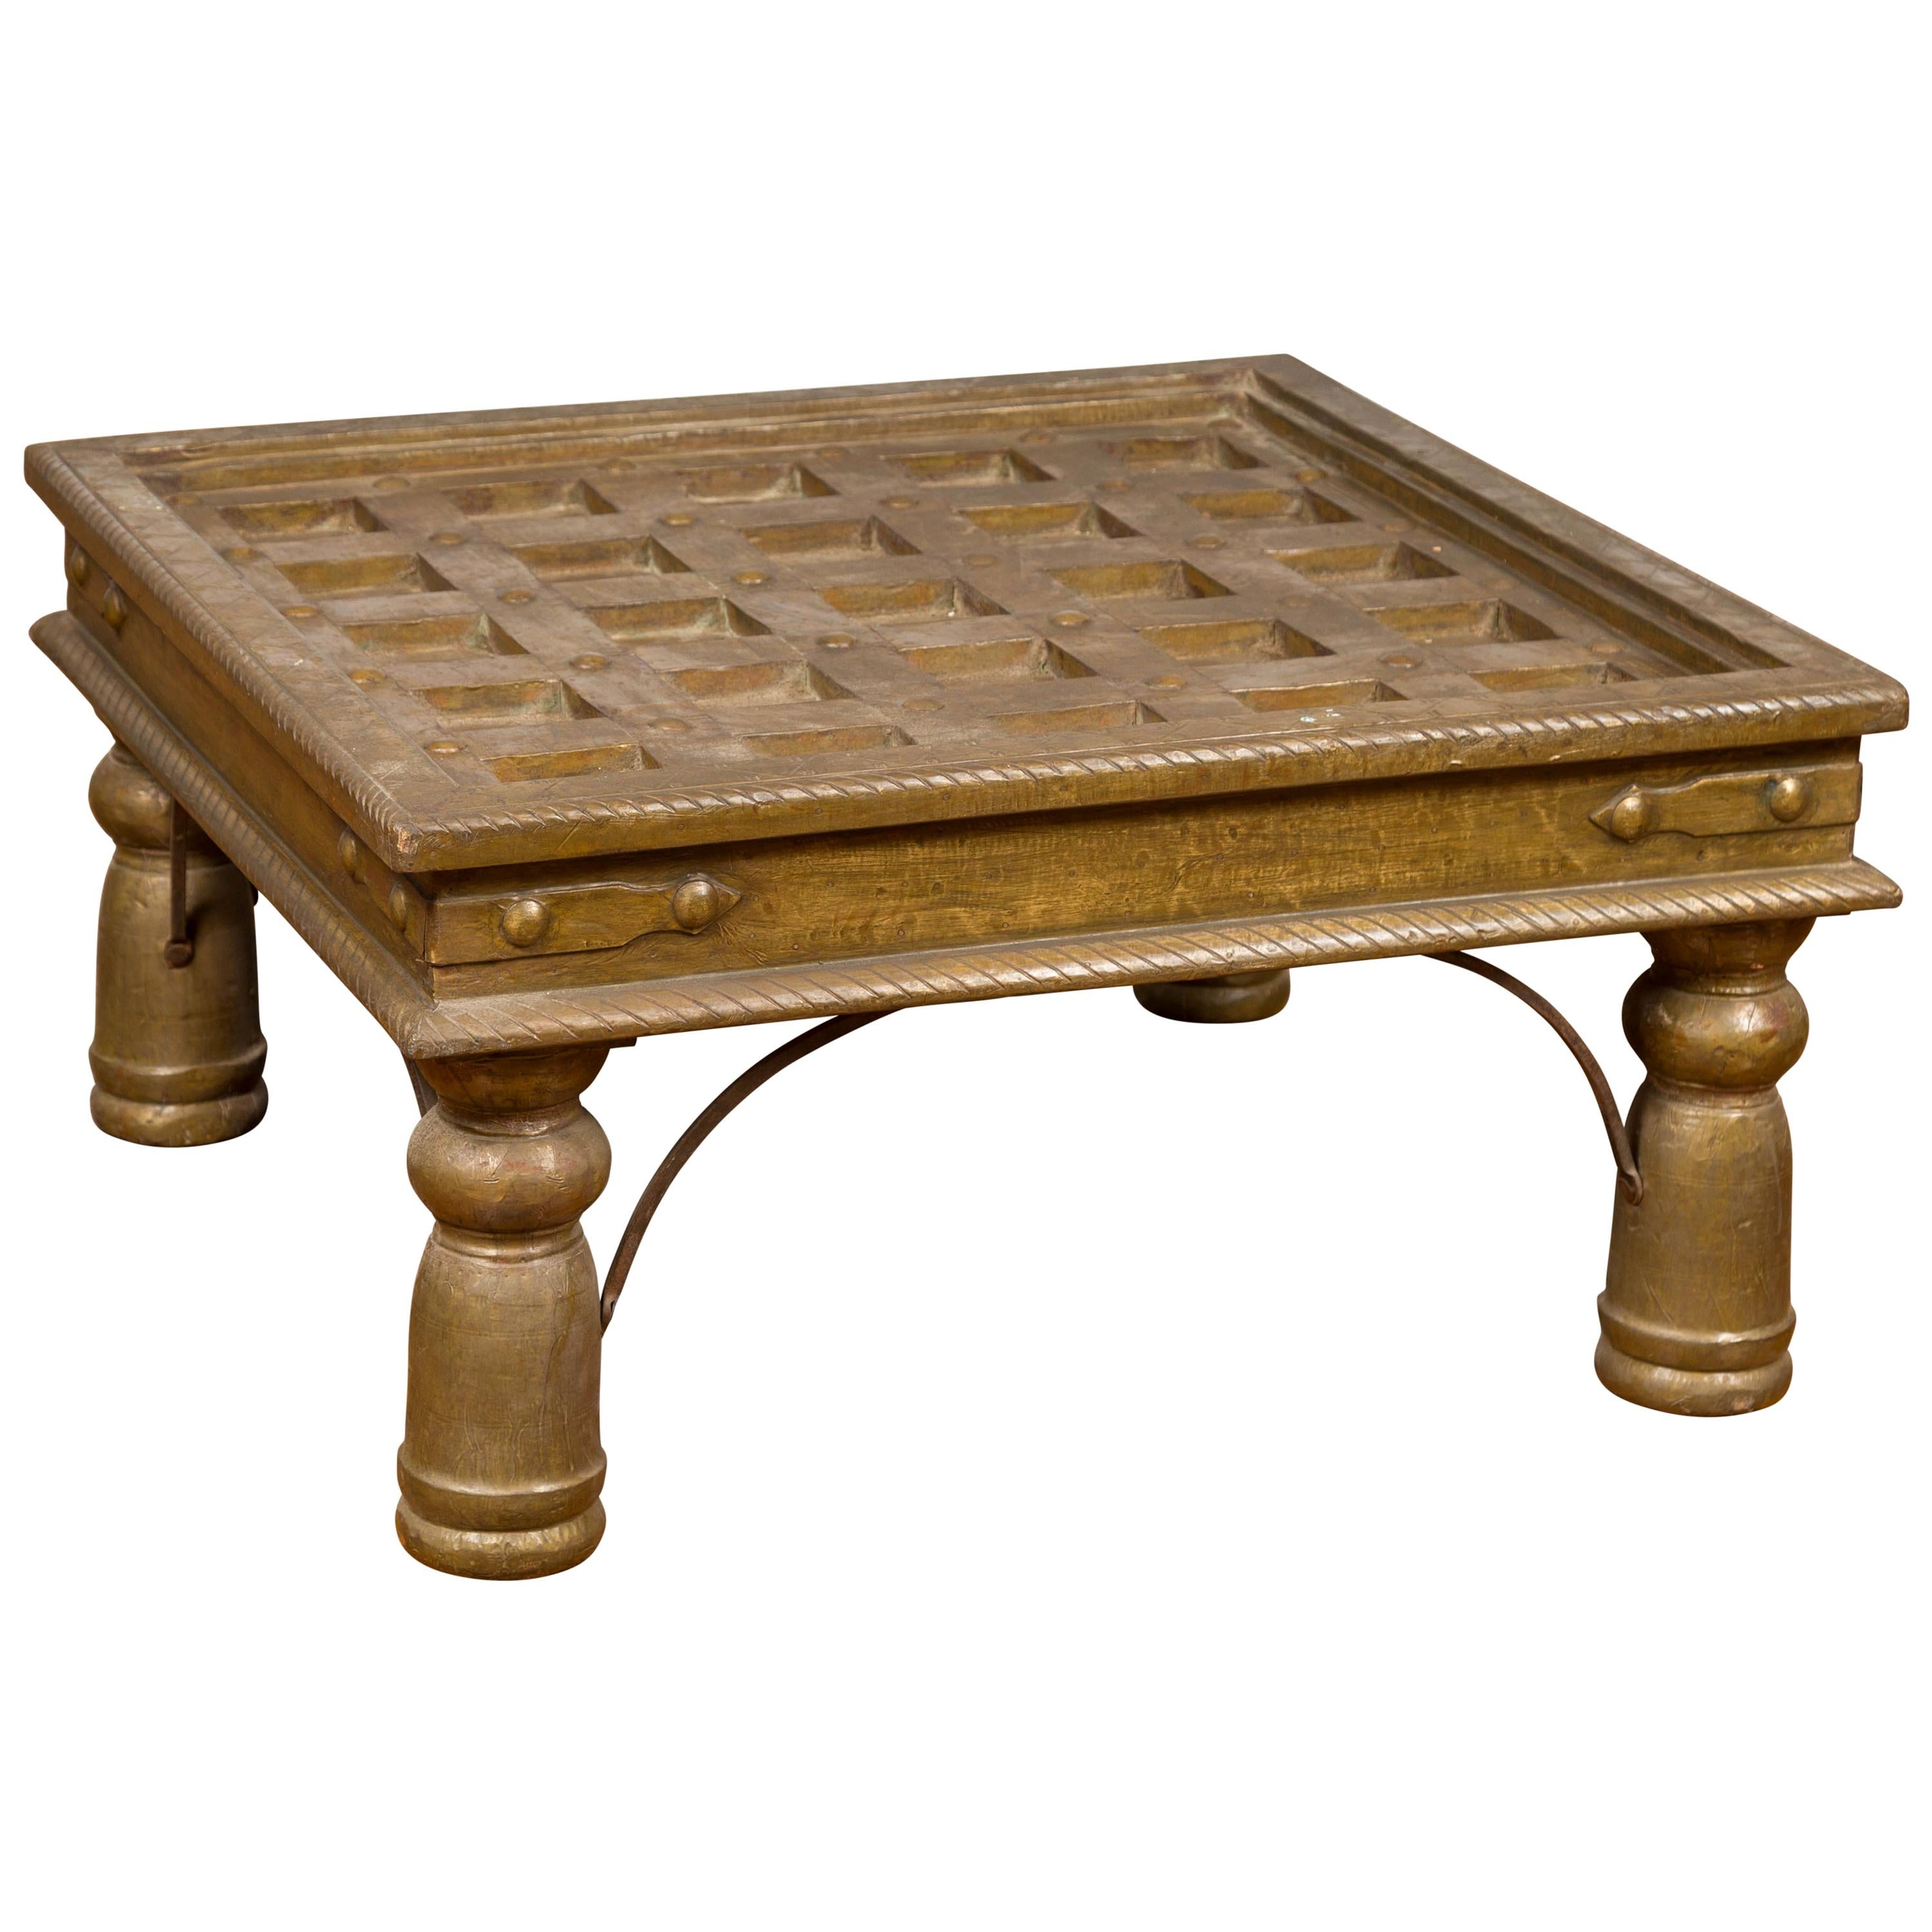 Indian Geometric Top Brass Sheathing Window Grate Made into a Coffee Table